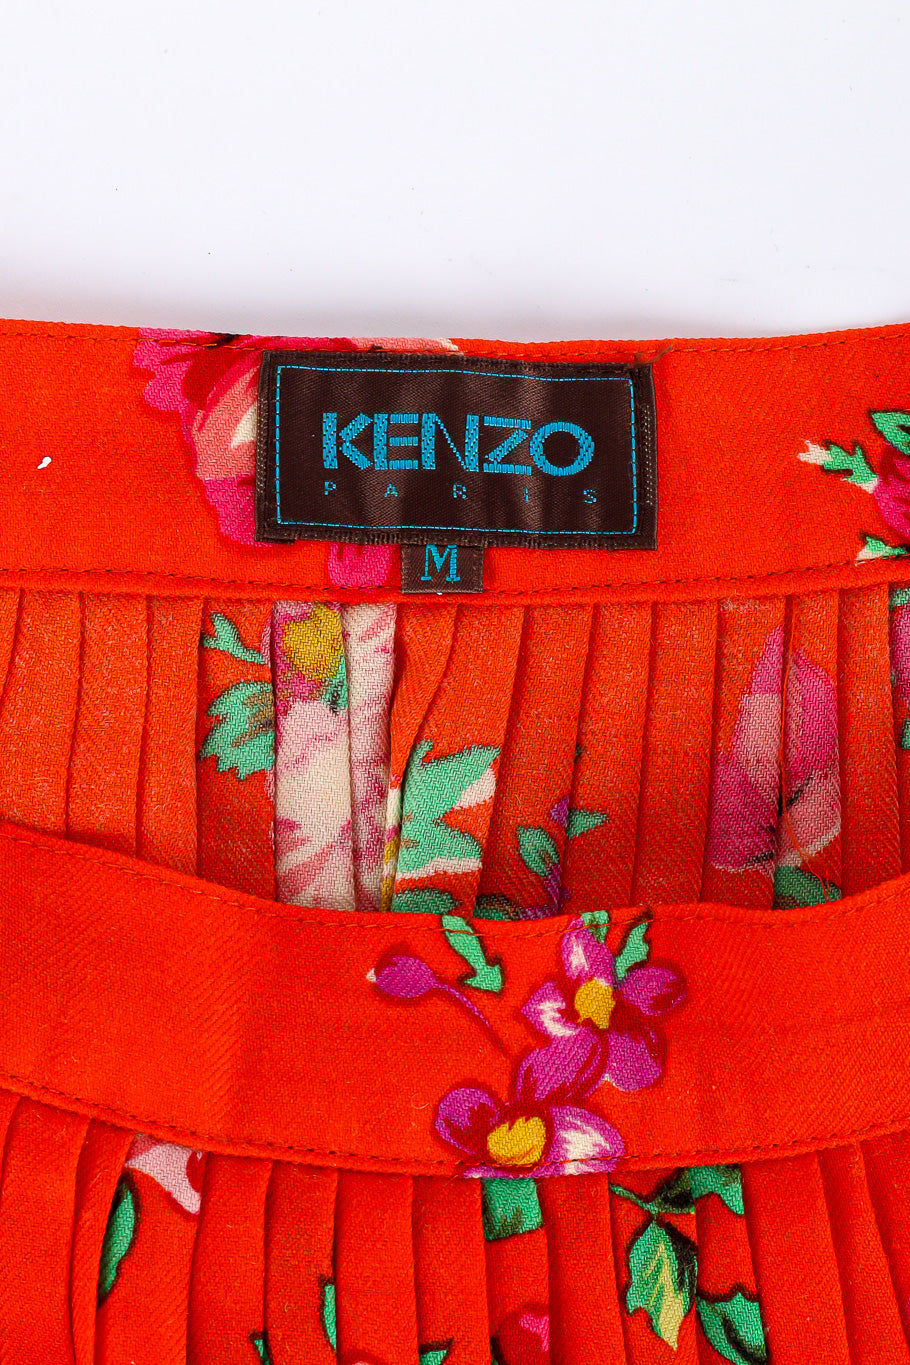 Bright floral pleated skirt by Kenzo Paris label close up @recessla